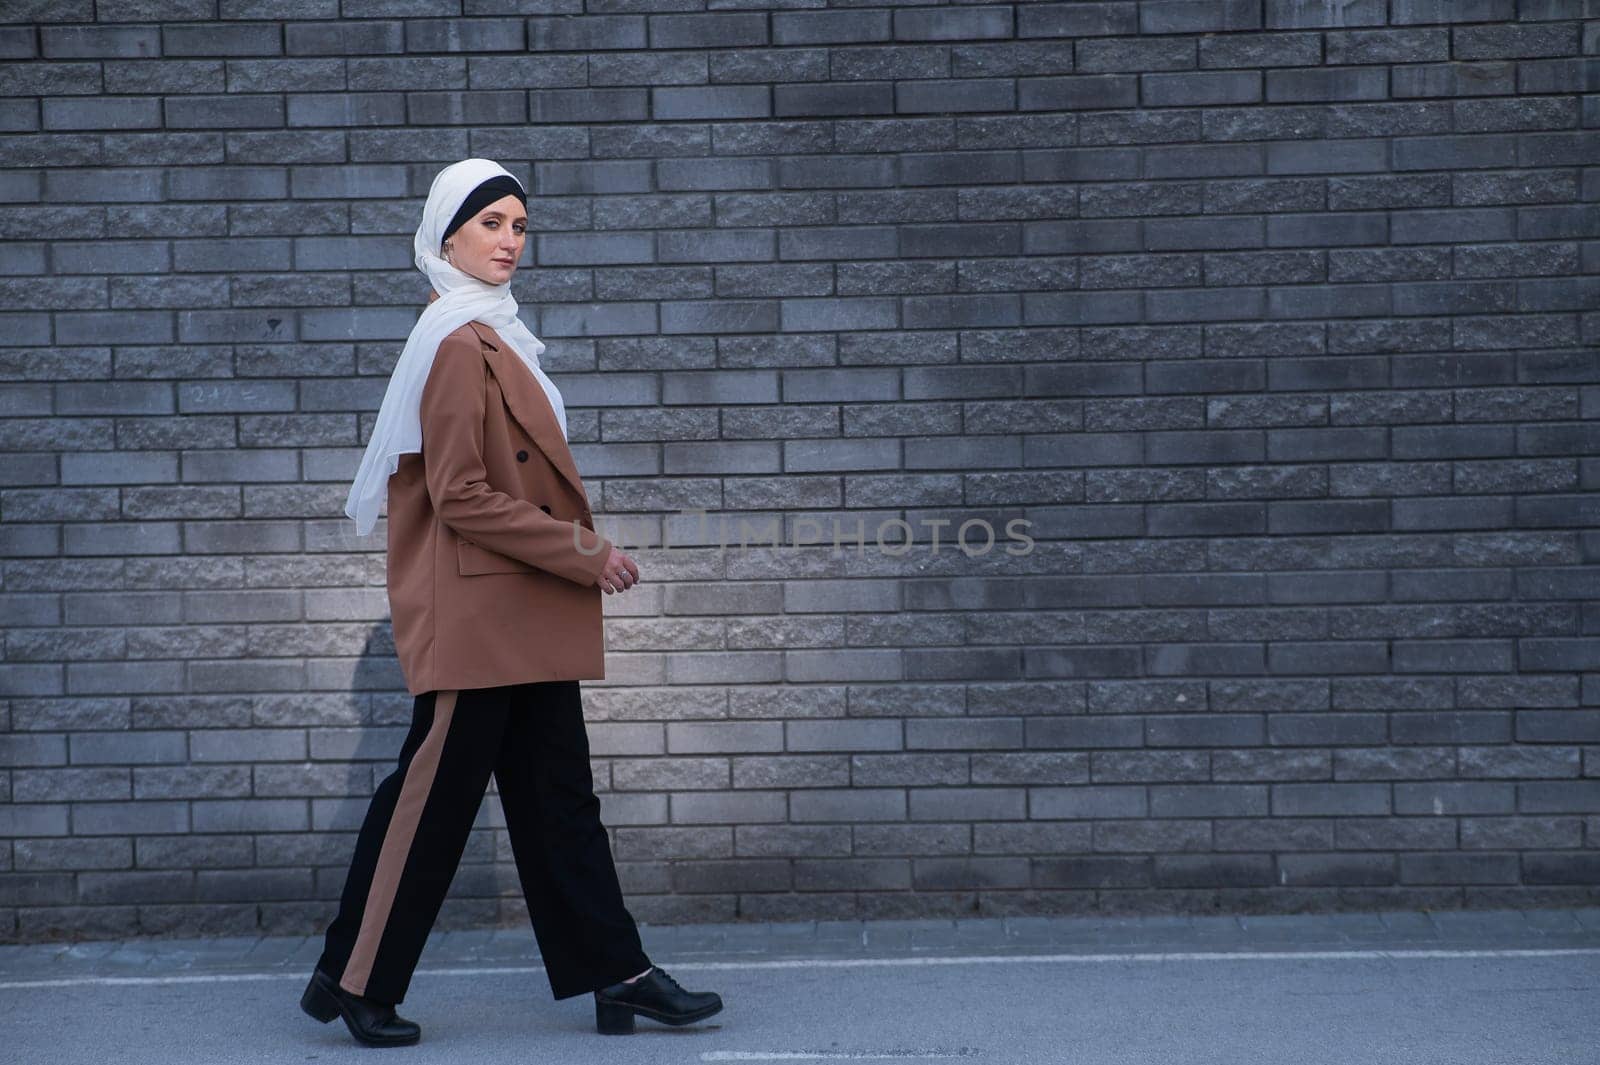 A young woman dressed in a hijab and a business suit walks along a brick wall. by mrwed54